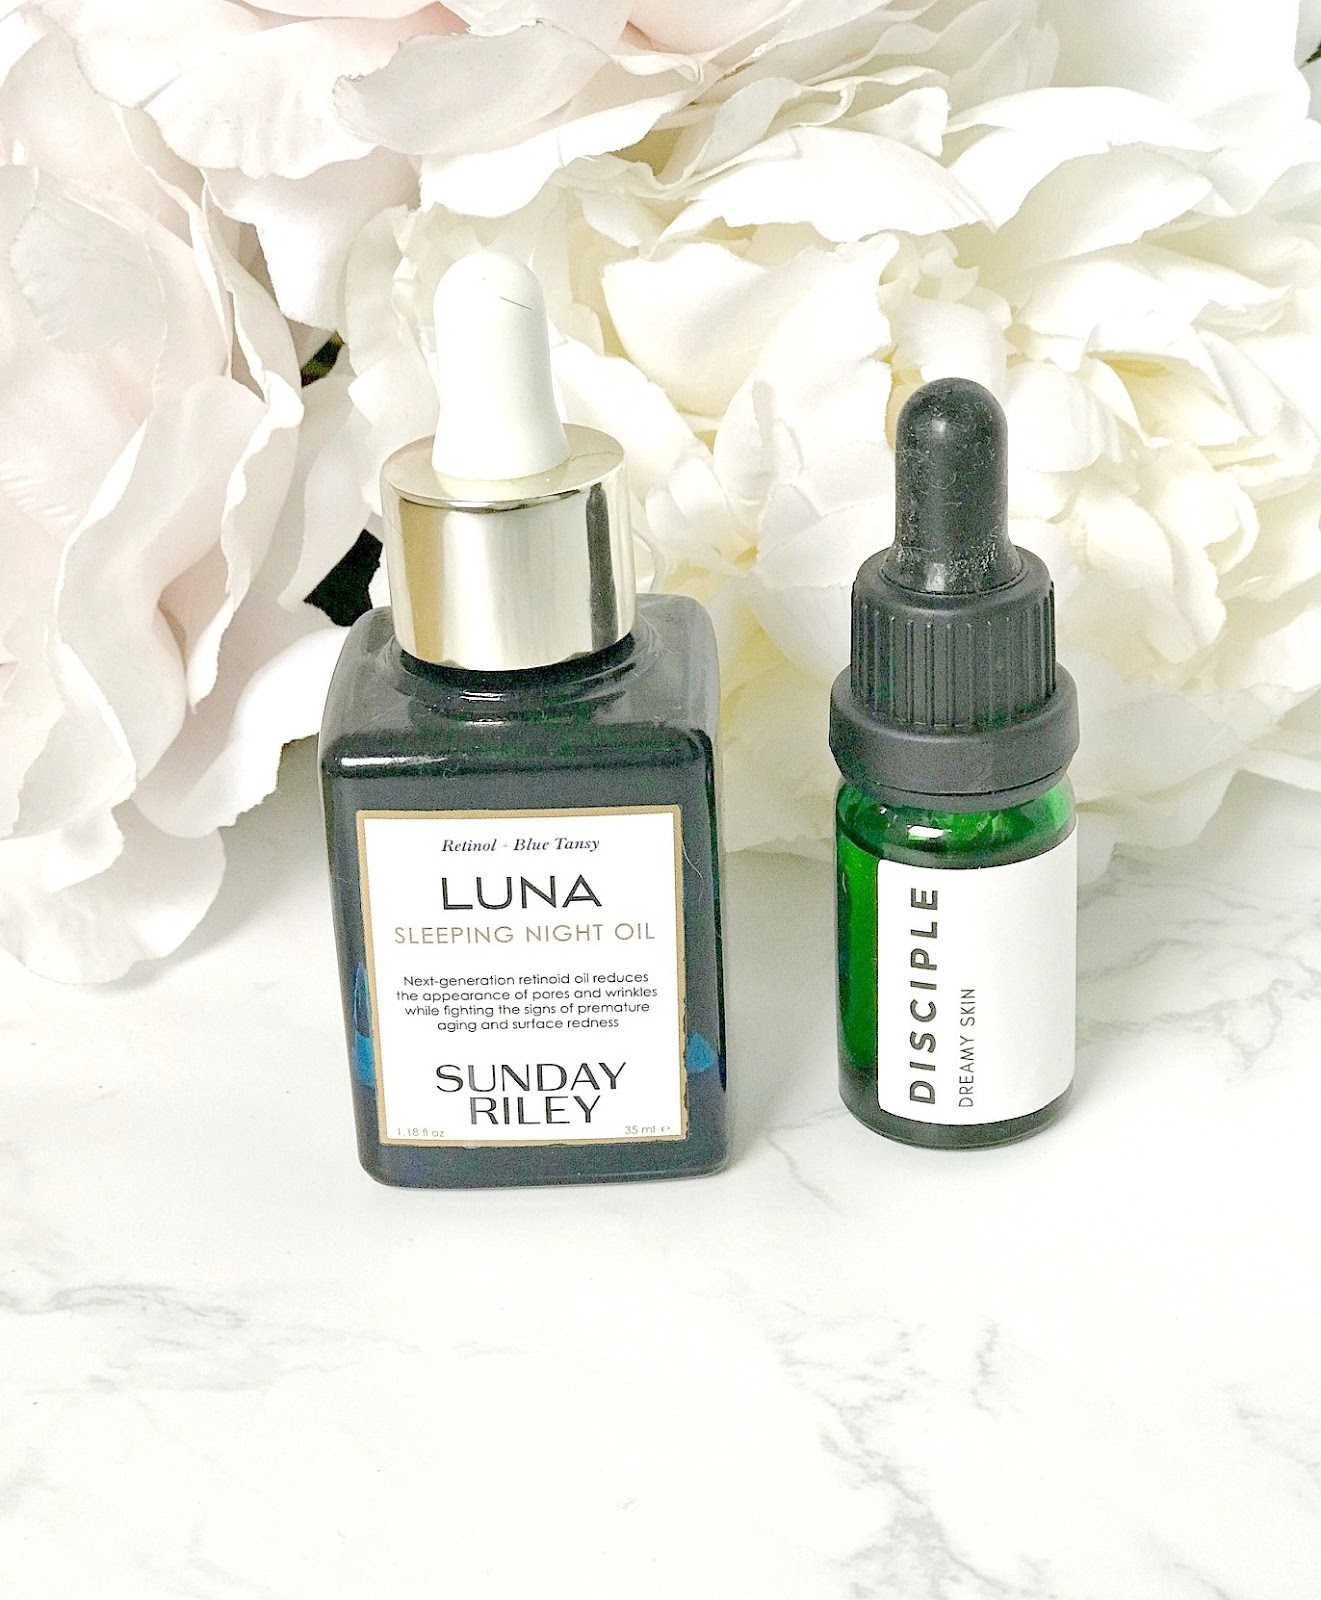 Cult Beauty Discount Code, Sunday Riley Luna Sleeping Night Oil Review, Disciple Dreamy Skin Retinyl Oil Review